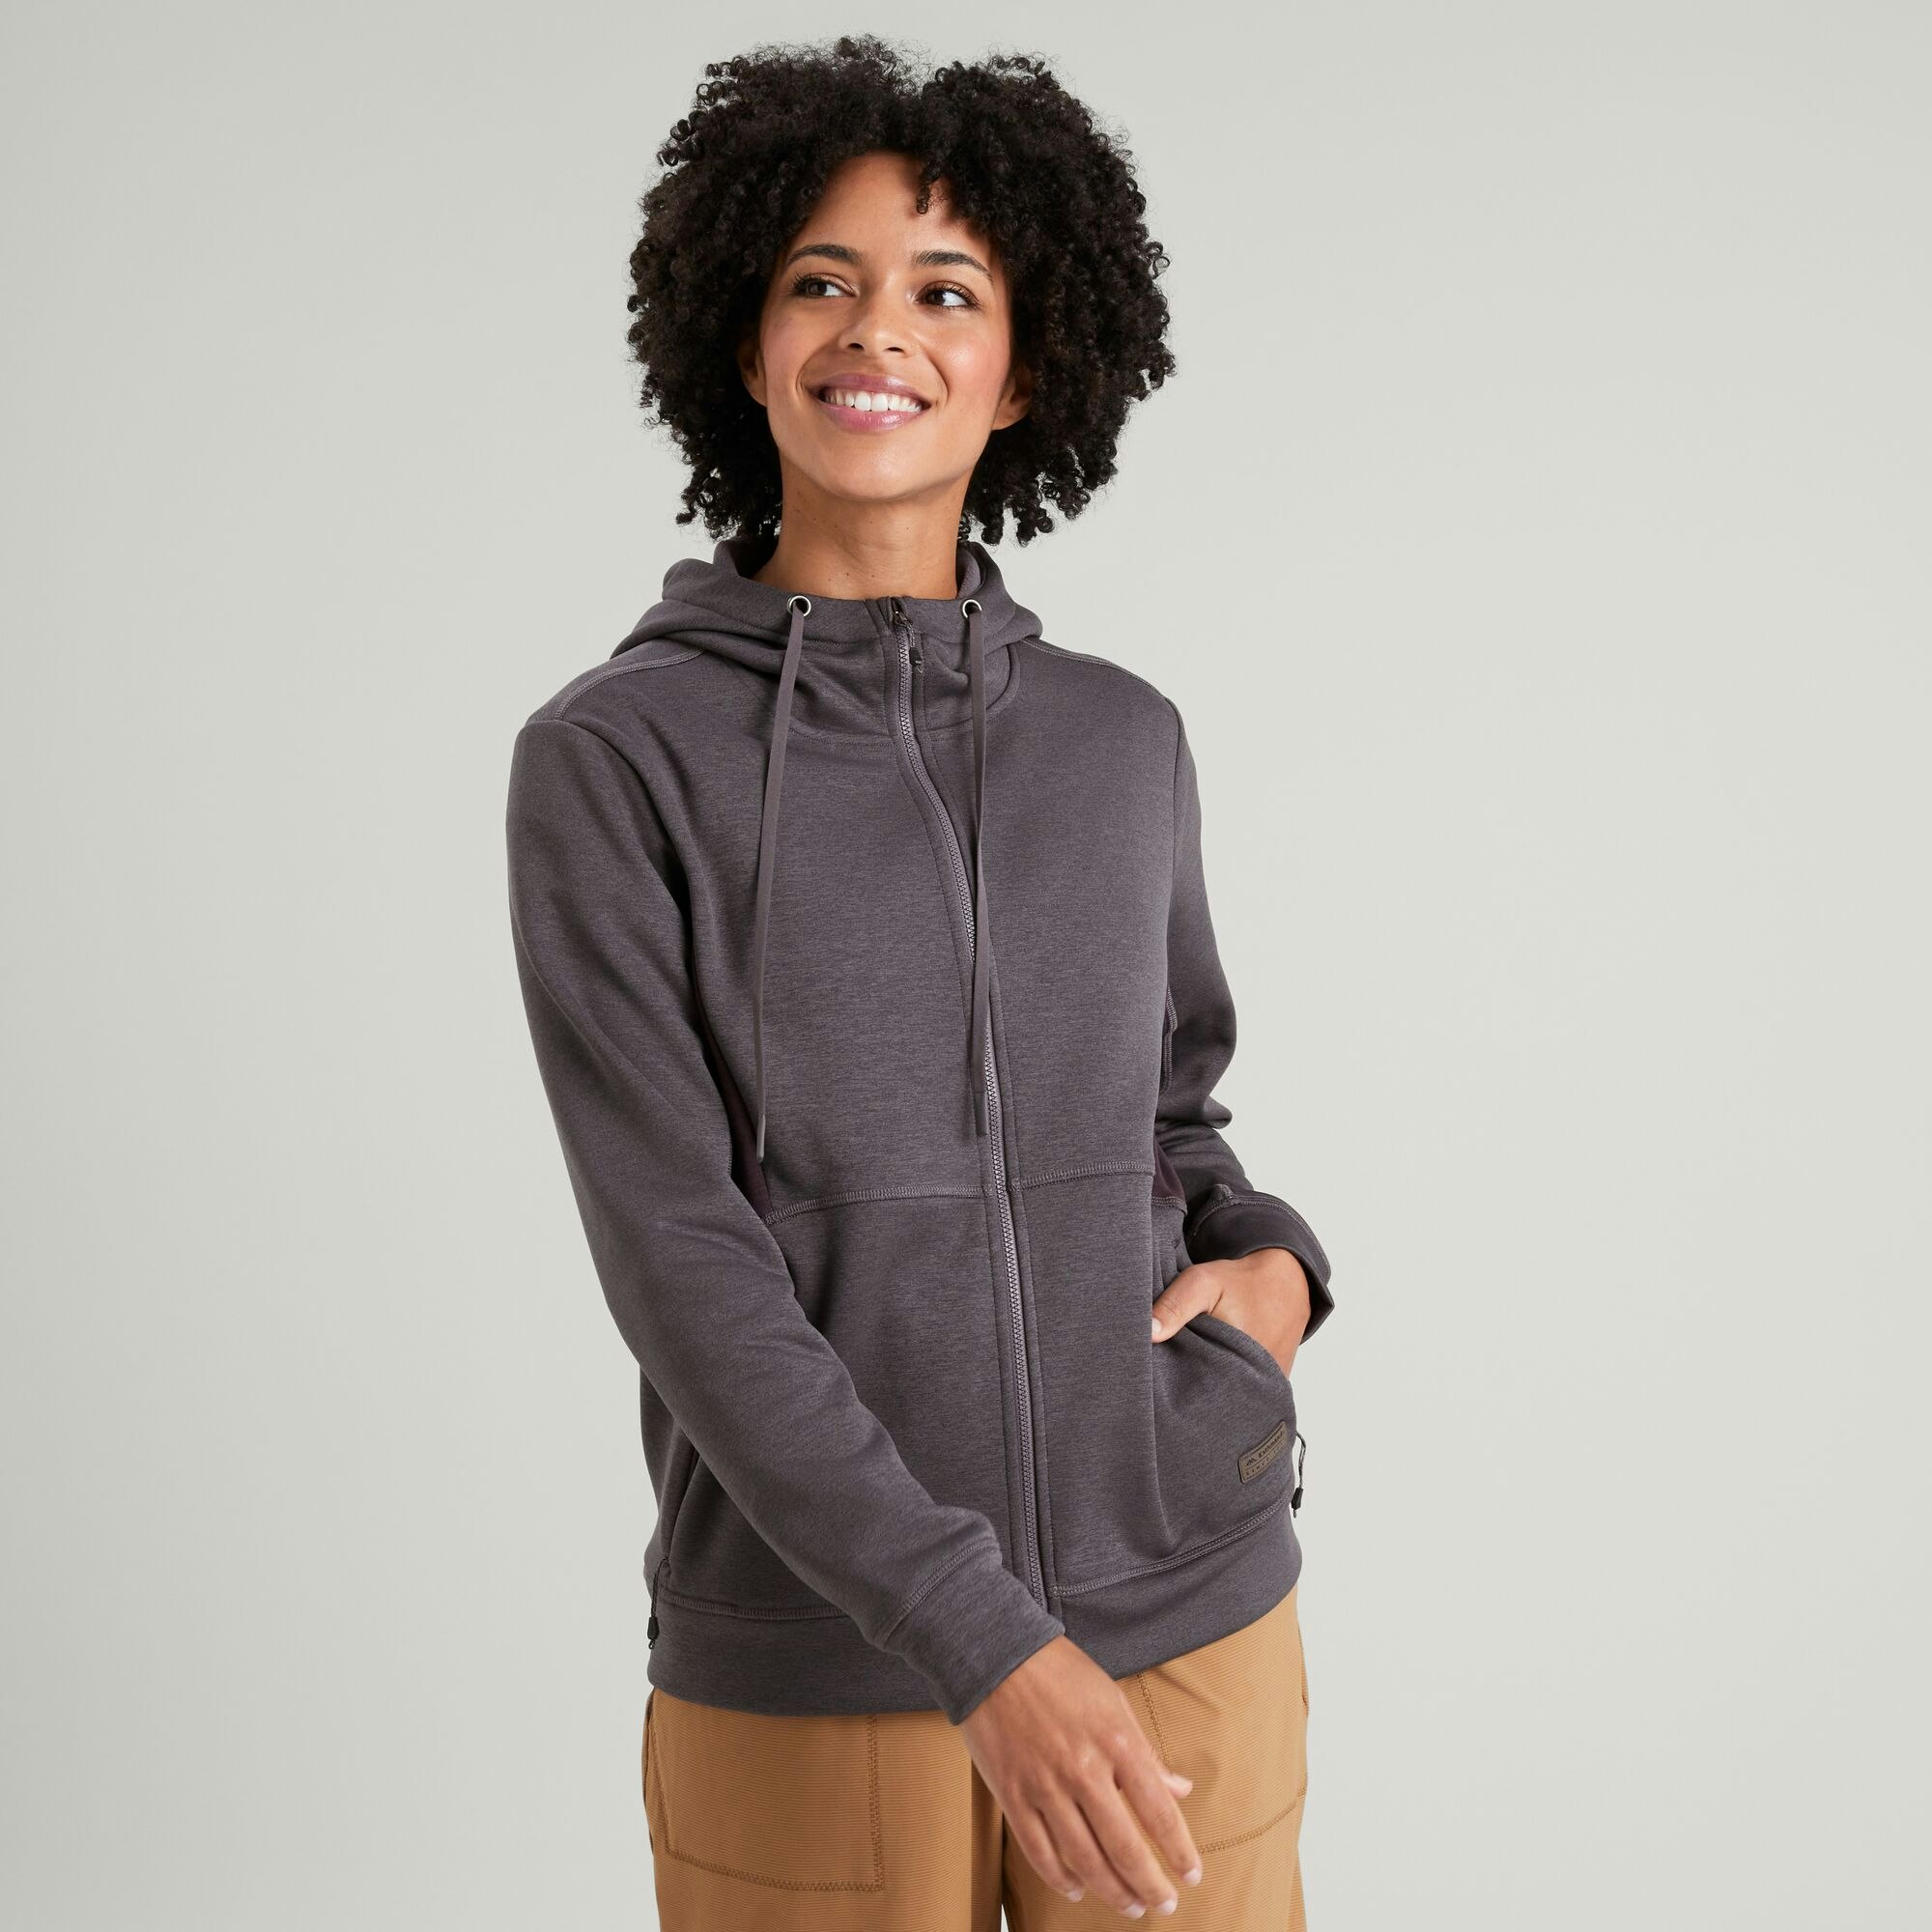 Light Grey Hoodie Womens Sport Jacket With Thumb Holes For Running, Yoga,  And Gym Workouts Zipper Closure, Stylish And Comfortable Sweatshirt For  Ladies From Hebaohua, $15.39 | DHgate.Com